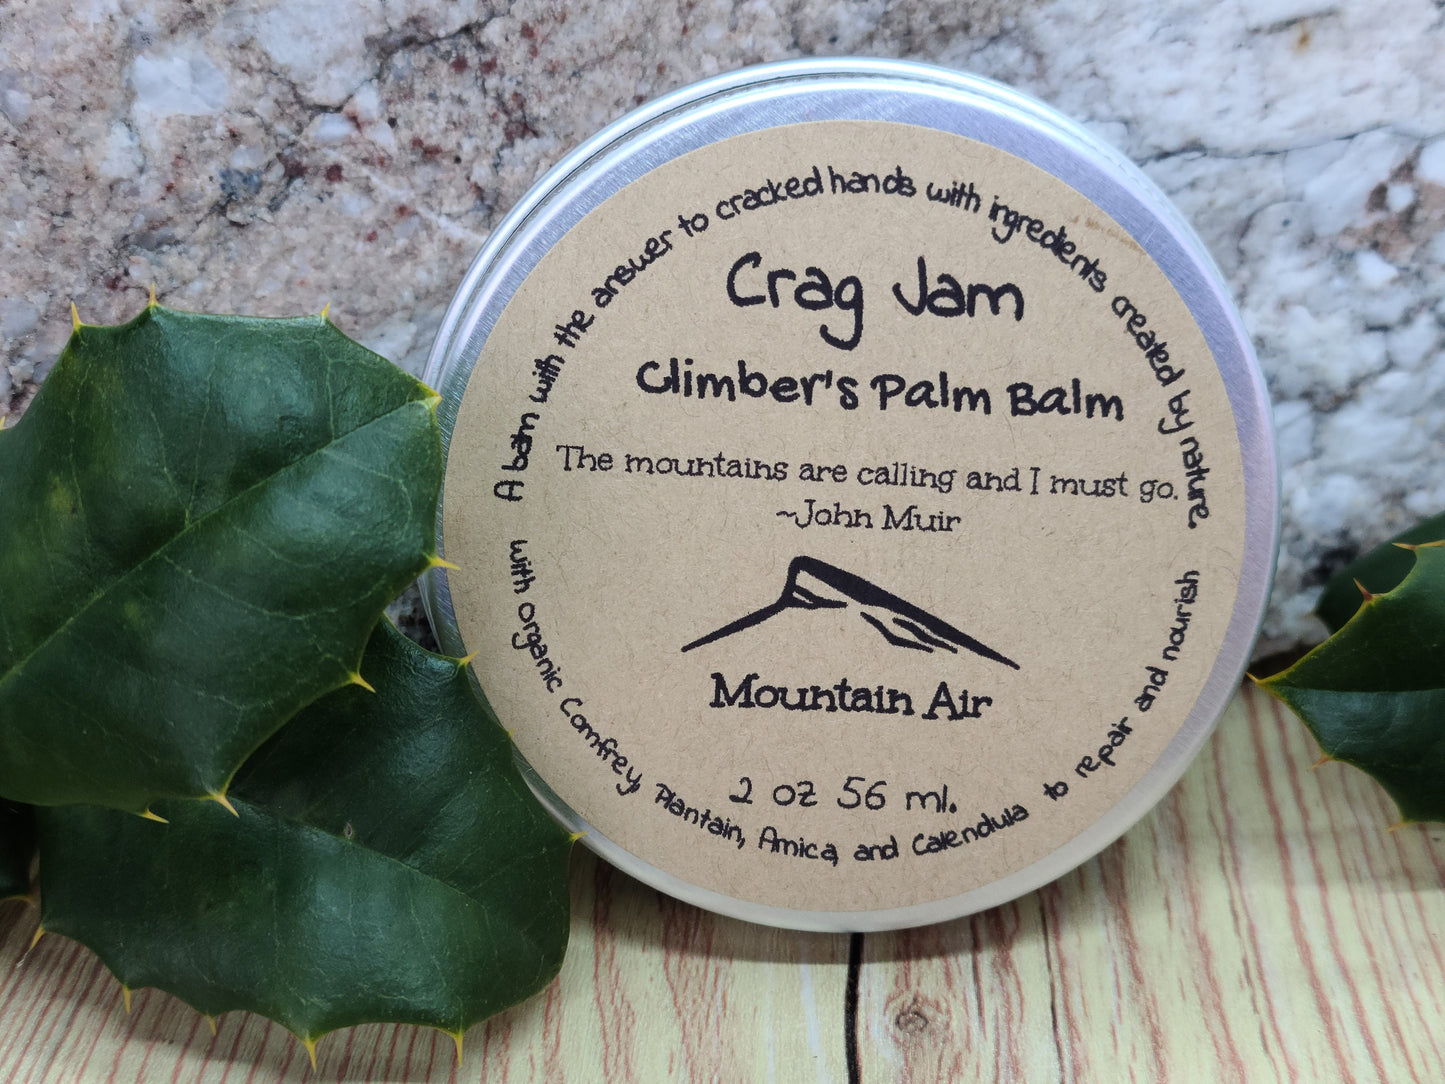 Crag Jam Climber's Palm Balm, Organic, Repair, Weight Lifting, Gardening, Moisturizes, Protects, Foot Balm, Working Hands, Sustainable